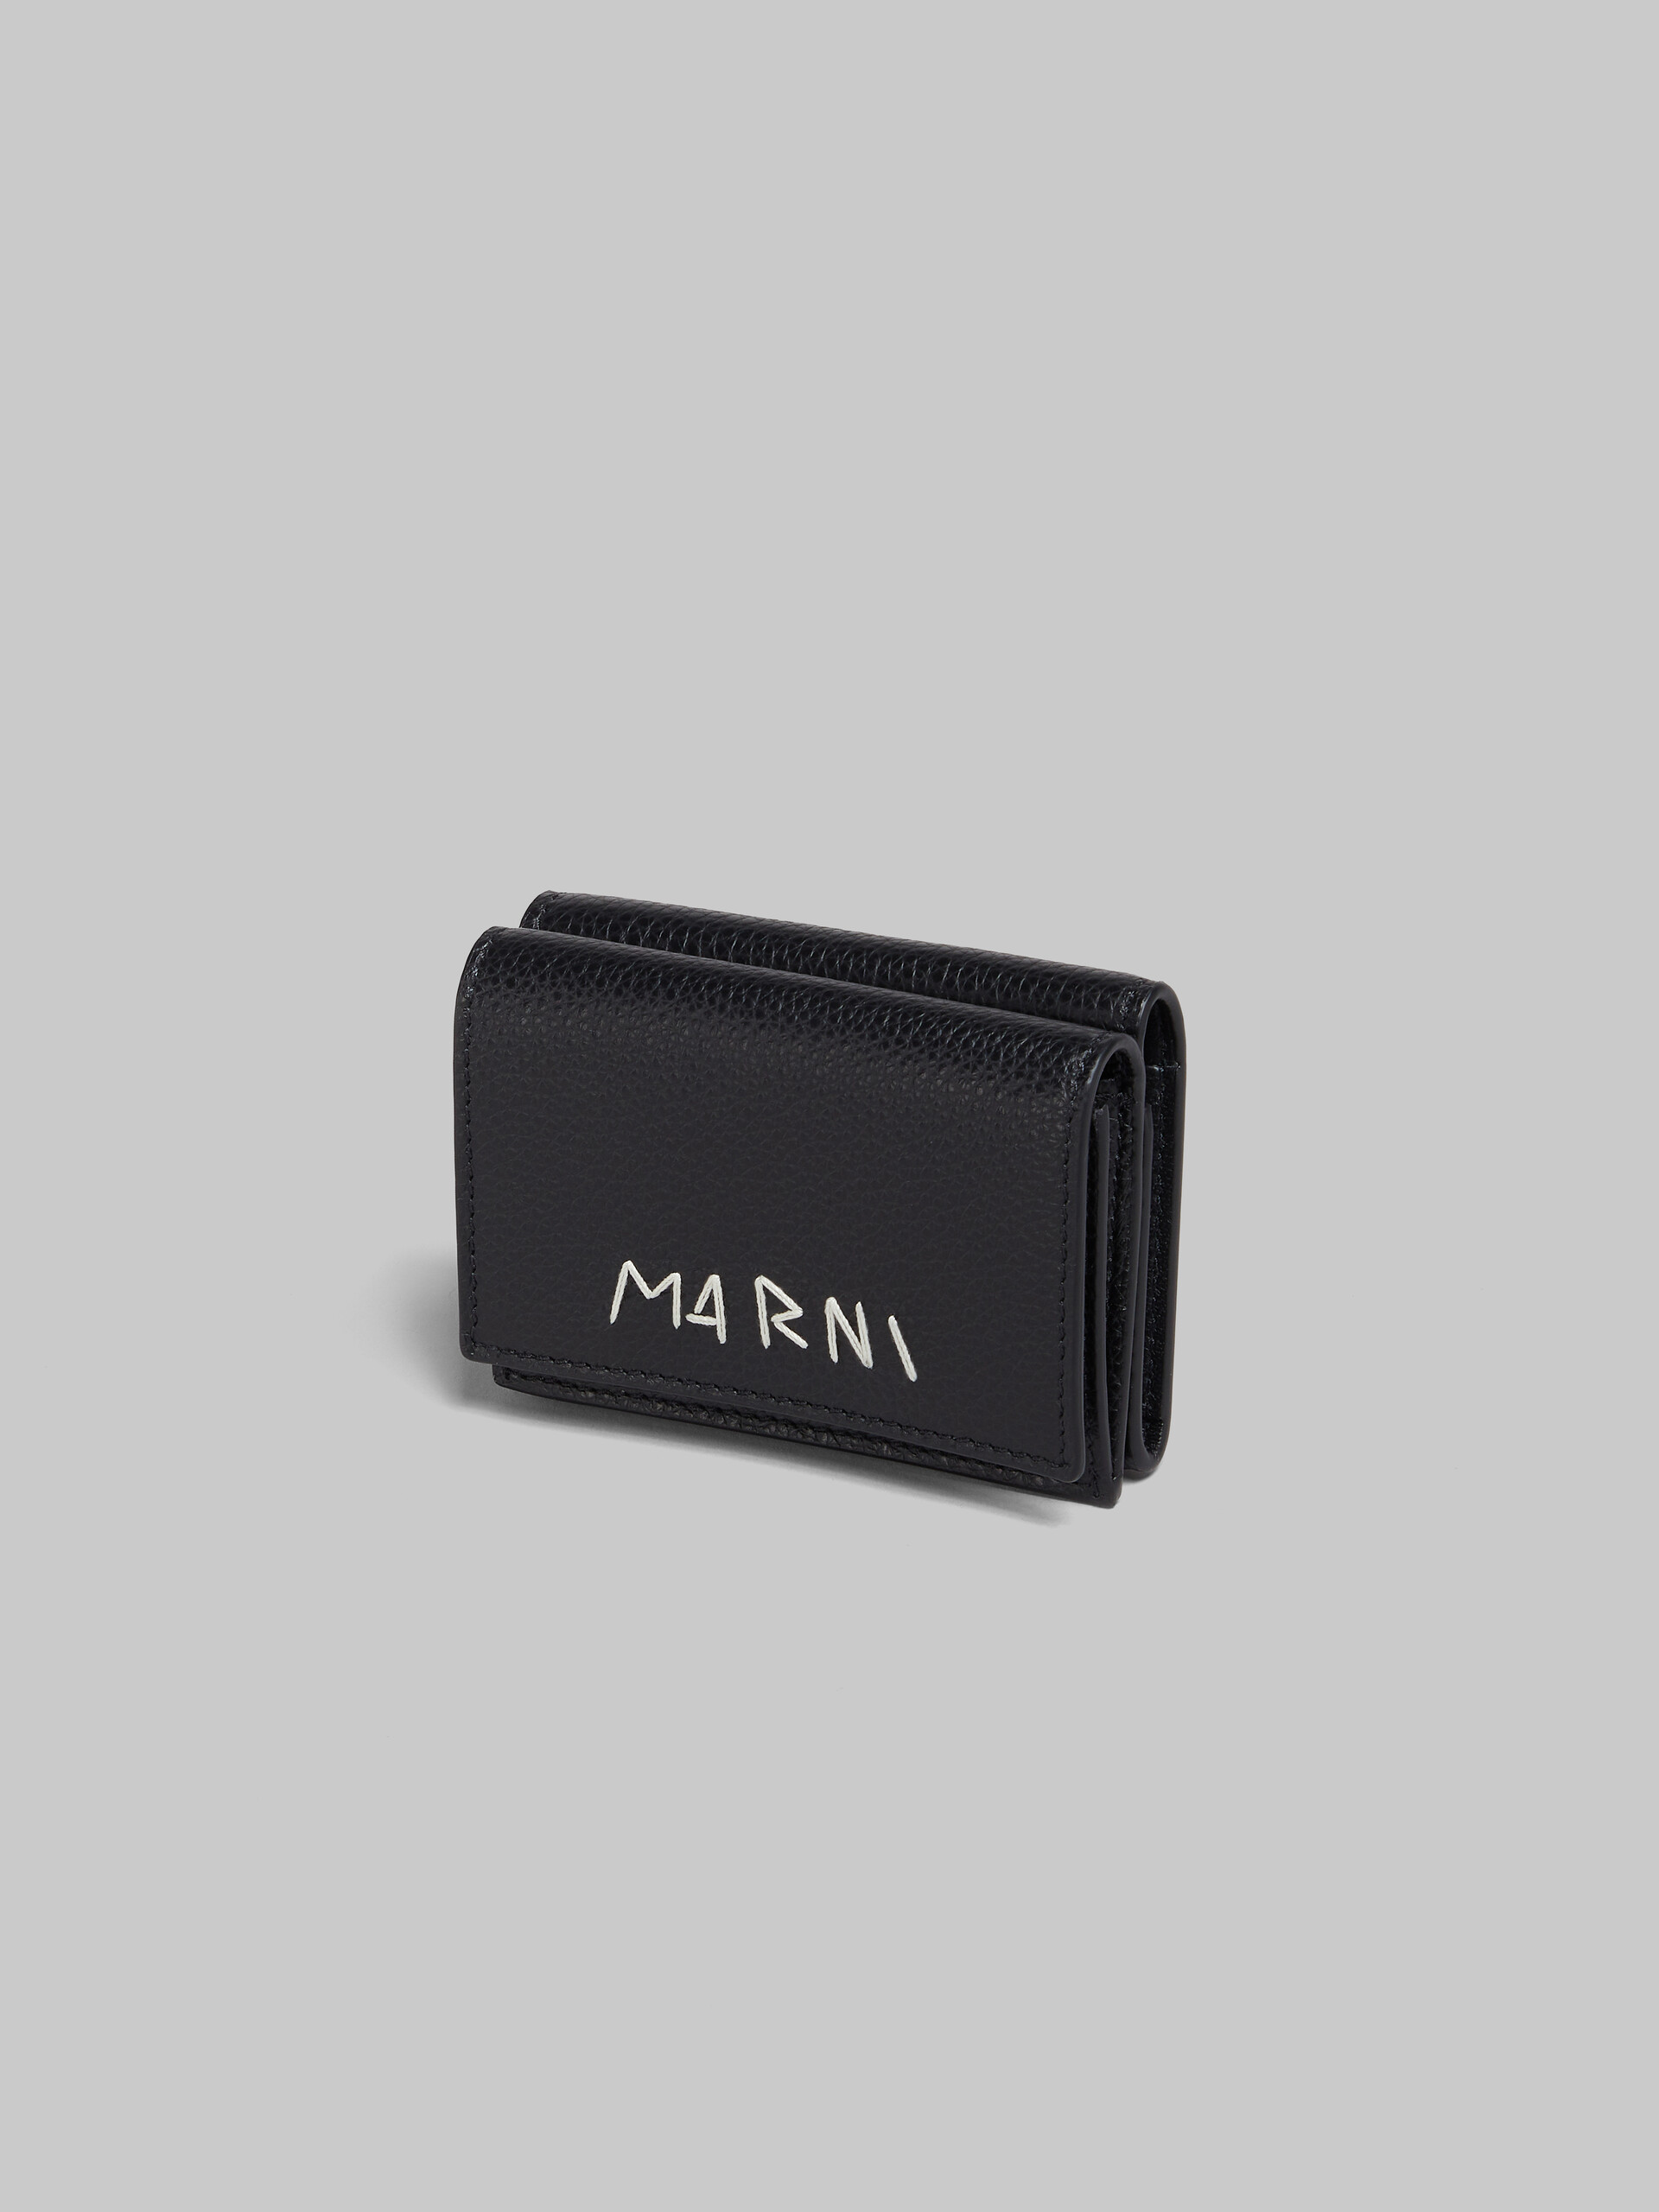 Pink leather trifold wallet with Marni mending - Wallets - Image 4